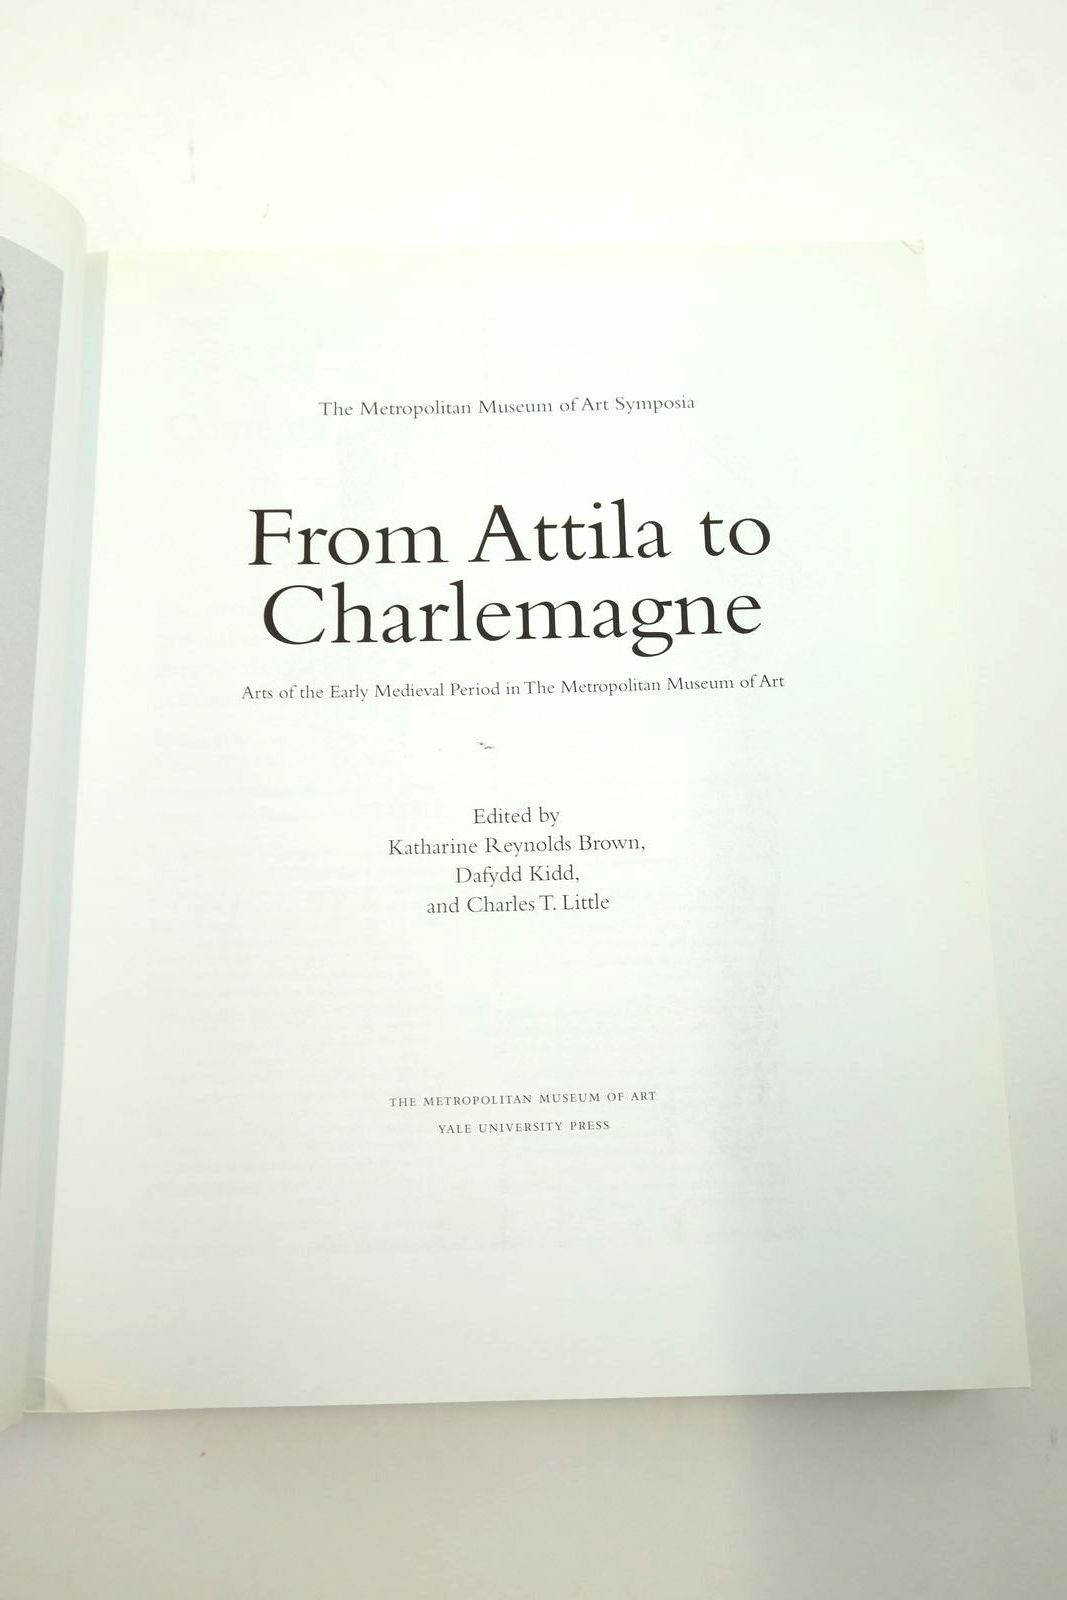 Photo of FROM ATTILA TO CHARLEMAGNE written by Brown, Katharine Reynolds
Kidd, Dafydd
Little, Charles T. published by The Metropolitan Museum of Art, Yale University Press (STOCK CODE: 2138941)  for sale by Stella & Rose's Books